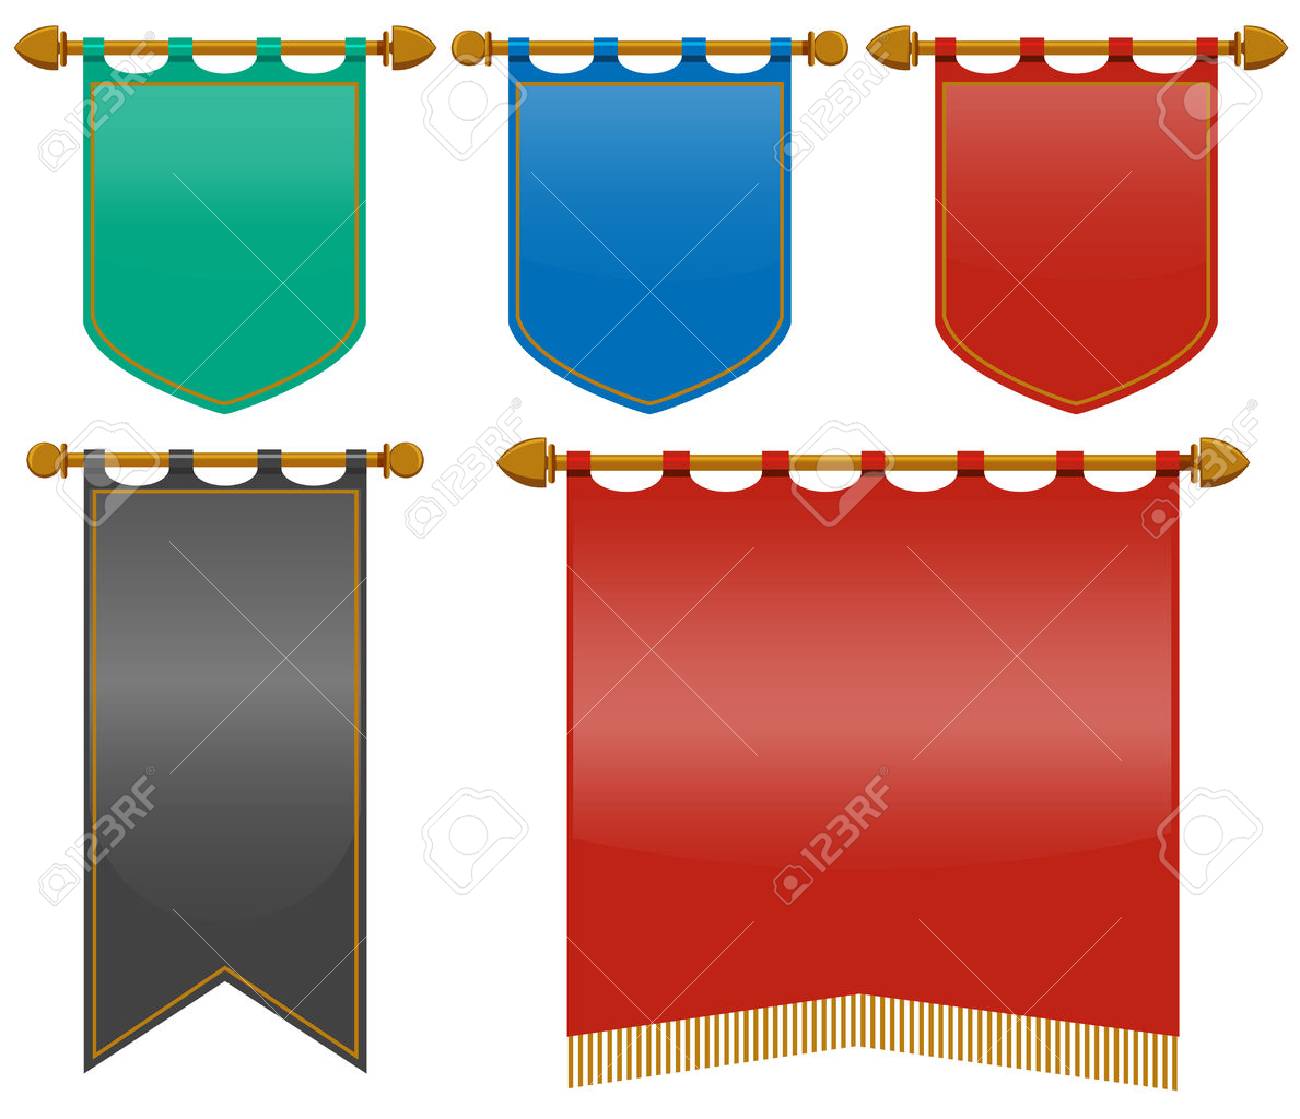 Medieval banner clipart.